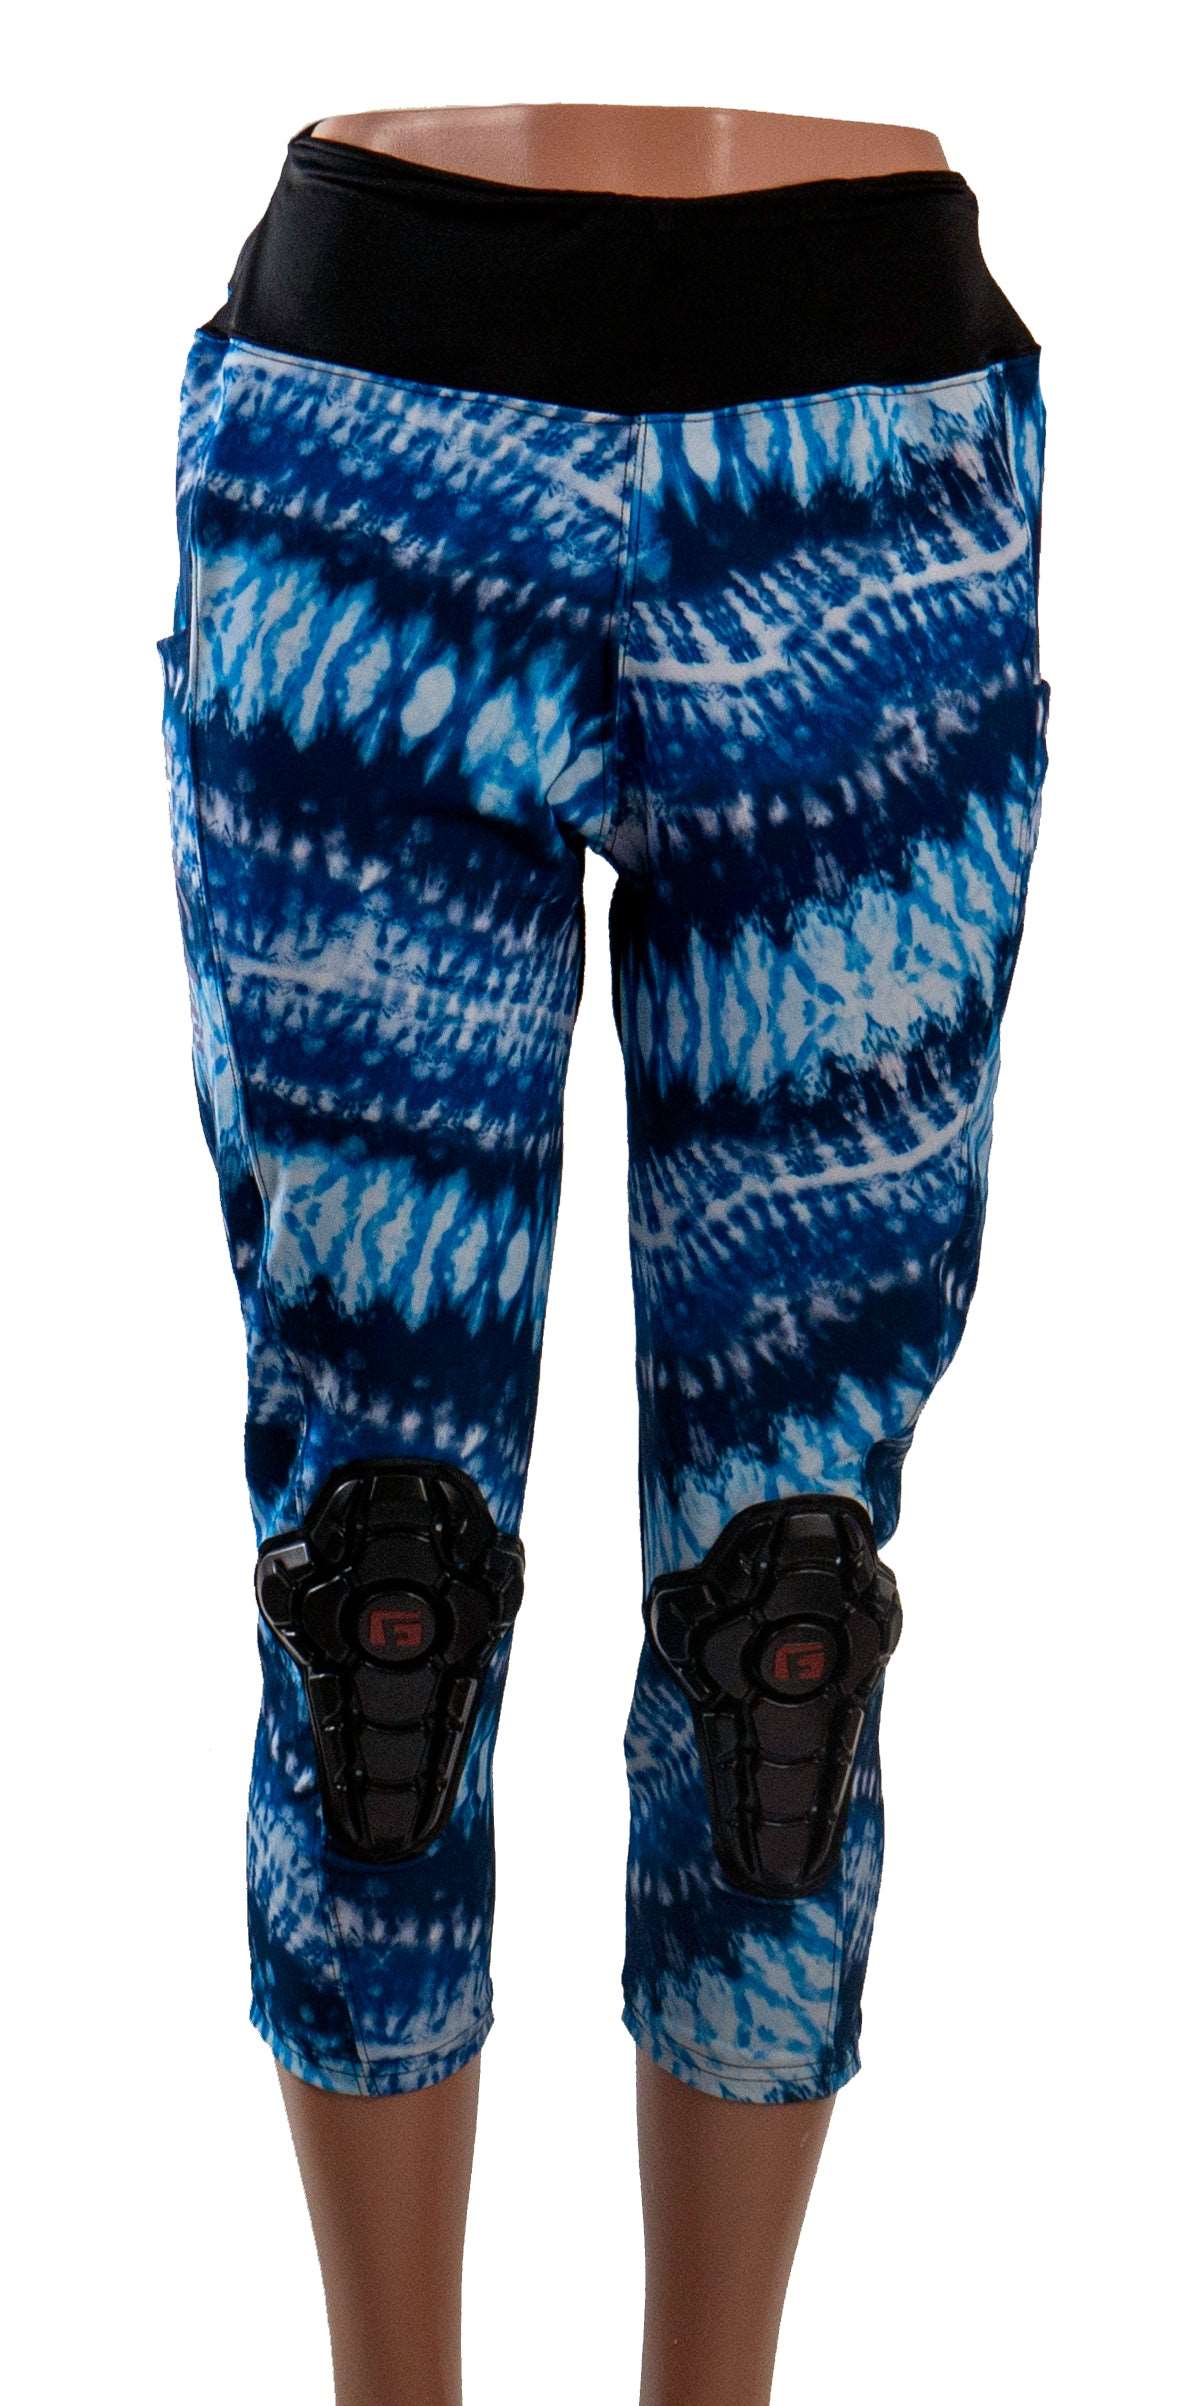 G-FORM COLLECTION WOMEN'S BIKE PANT BLUE WAVE - Moxie Cycling